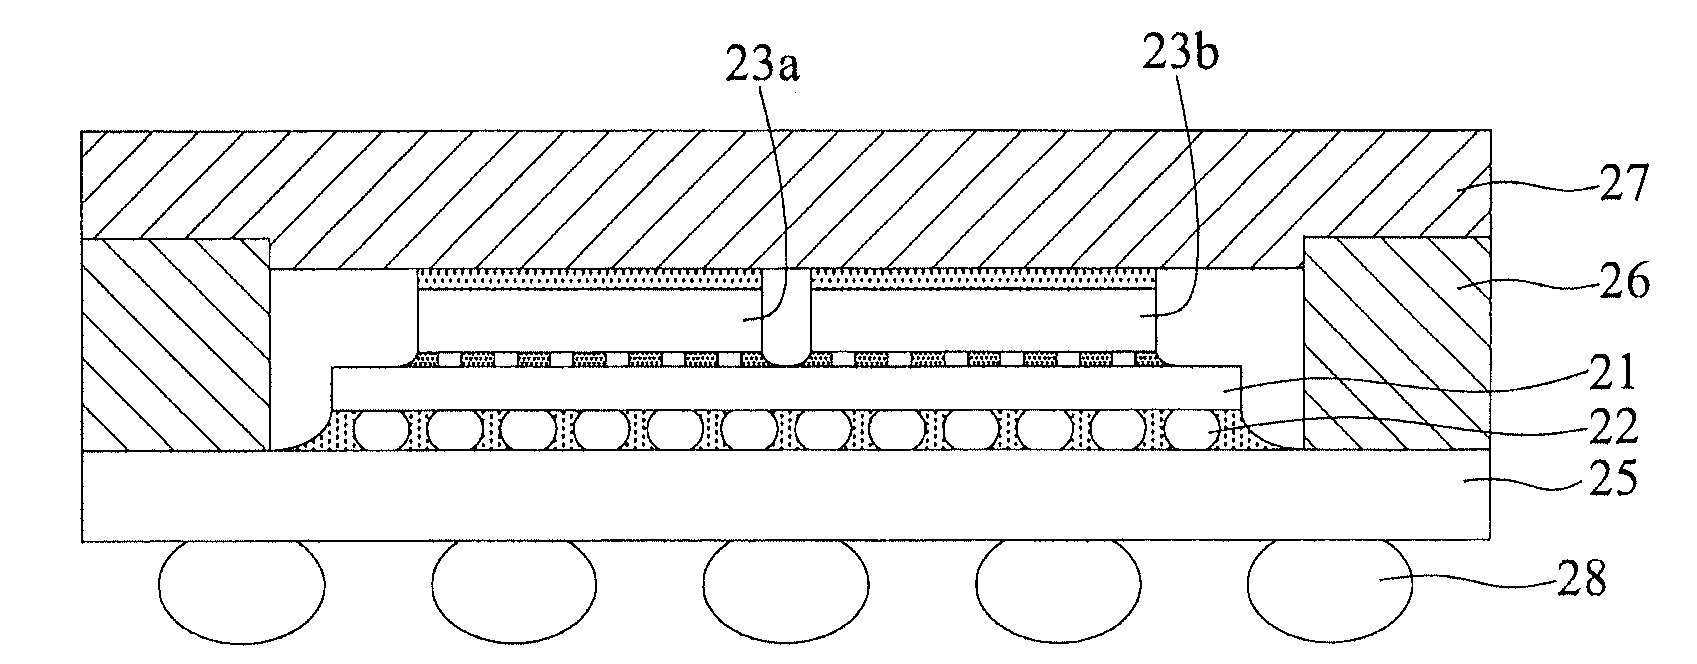 Method of testing a semiconductor package